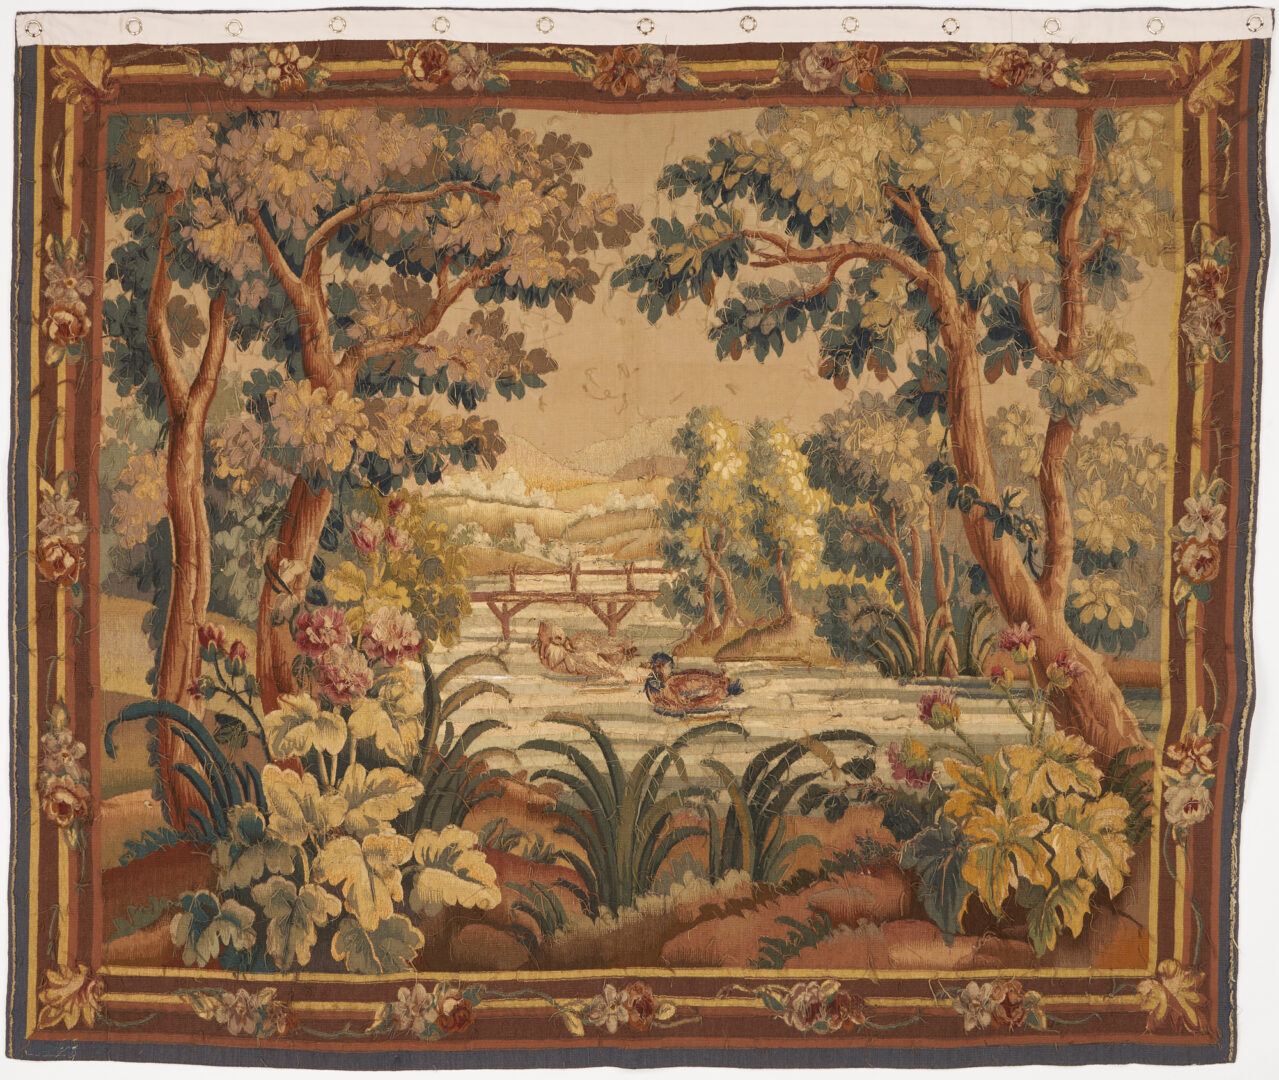 Lot 431: 19th c. French Aubusson Tapestry, Landscape with Ducks